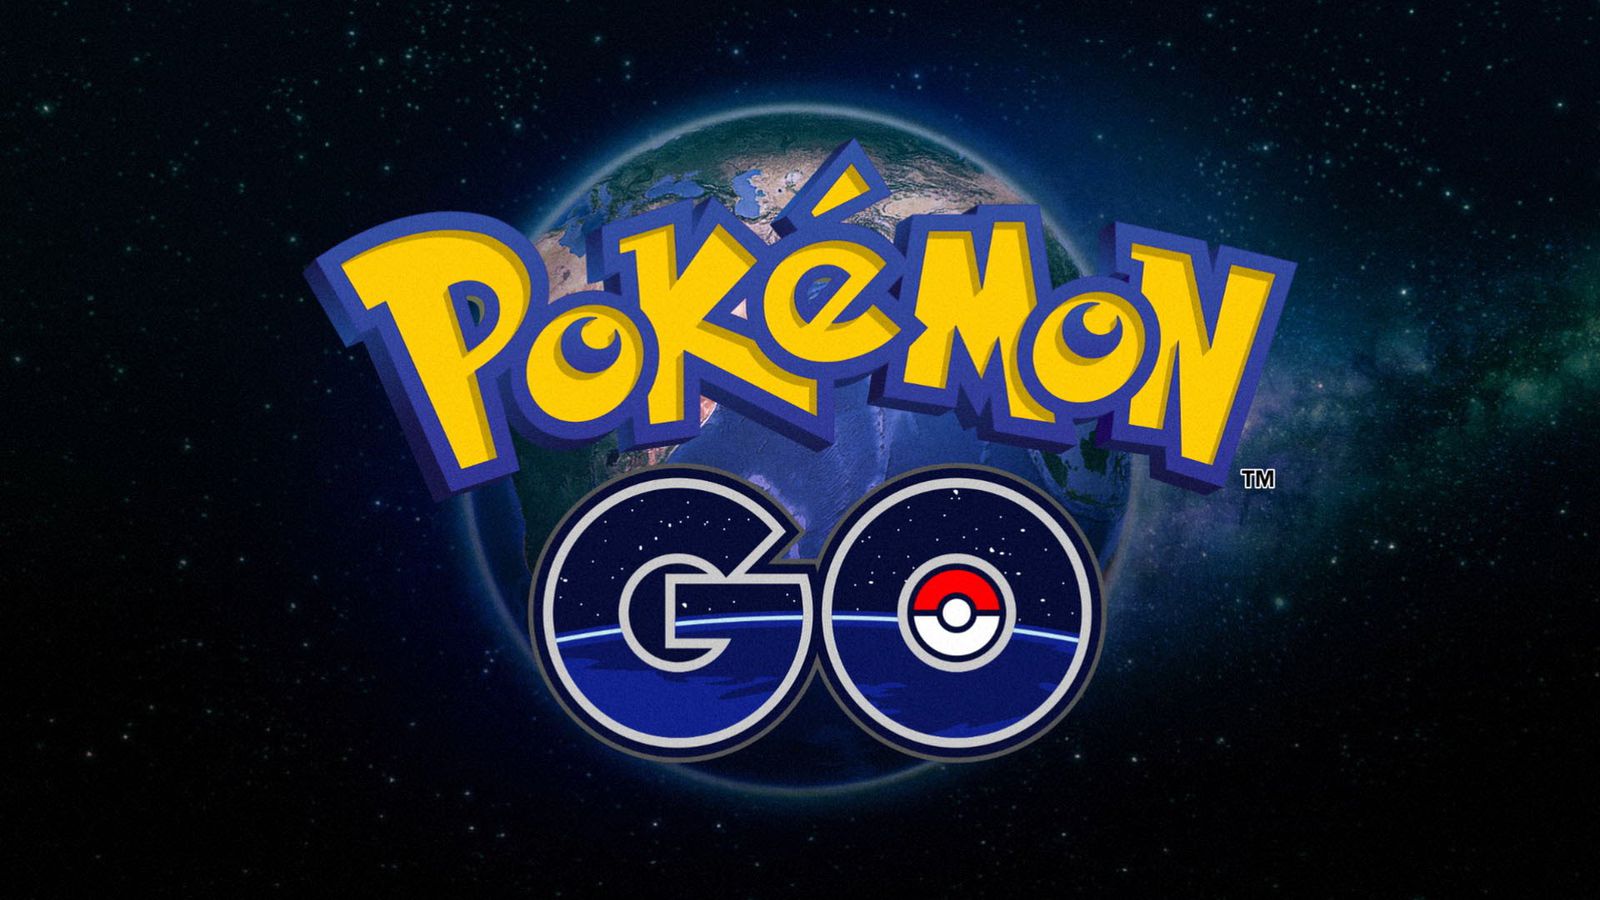 Pokemon Go eludes cloning attempts by big game studios: executives